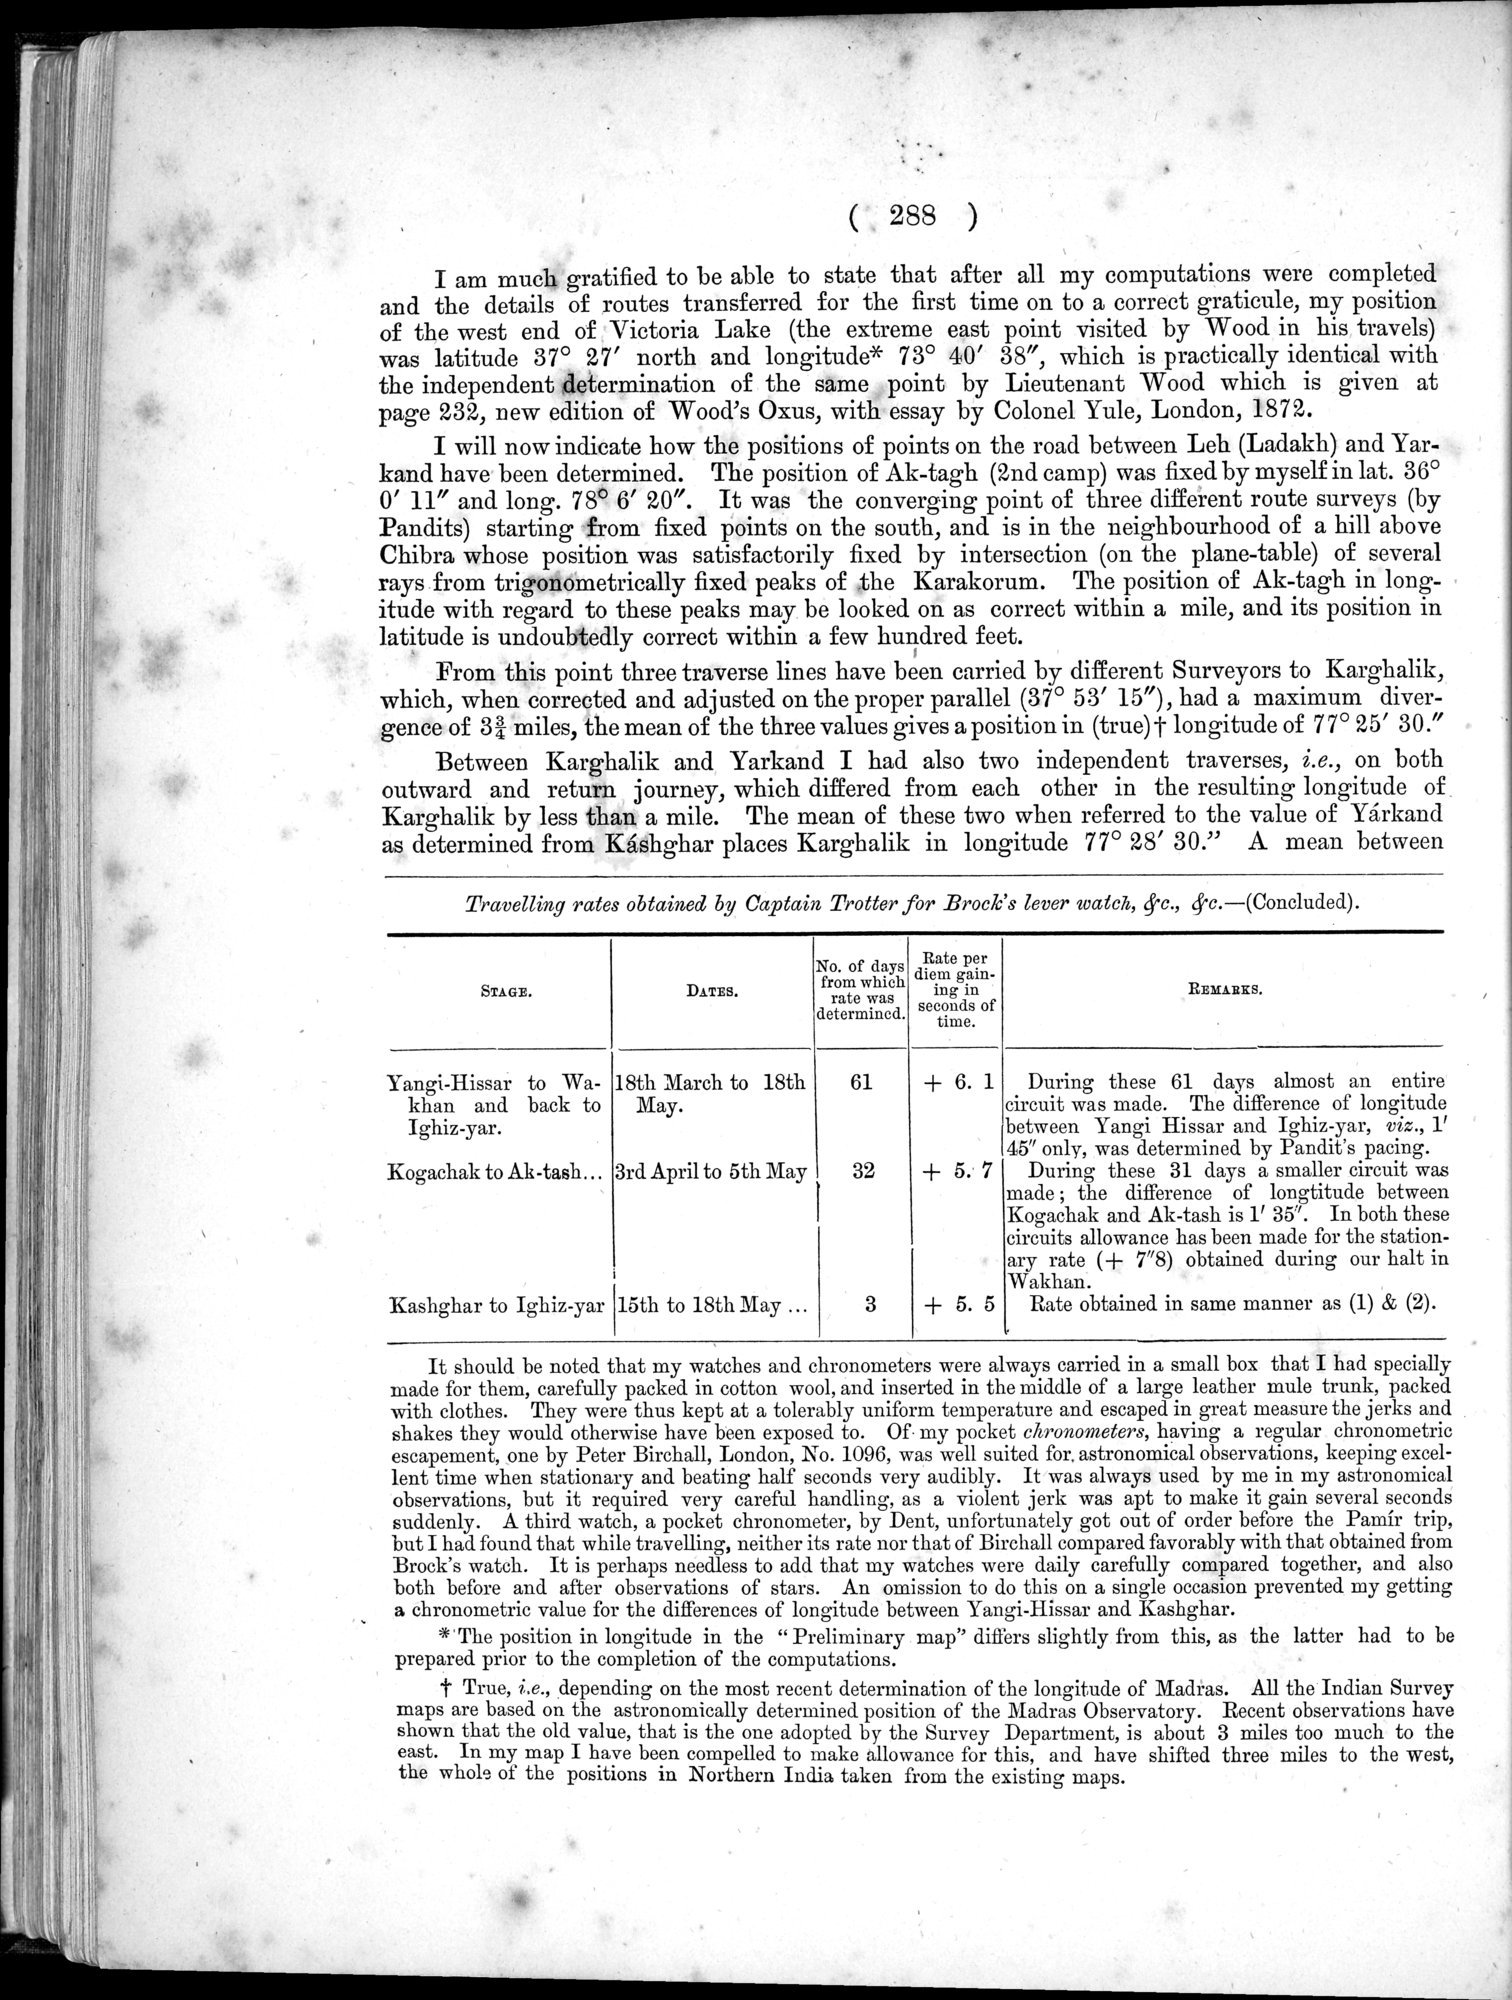 Report of a Mission to Yarkund in 1873 : vol.1 / Page 412 (Grayscale High Resolution Image)